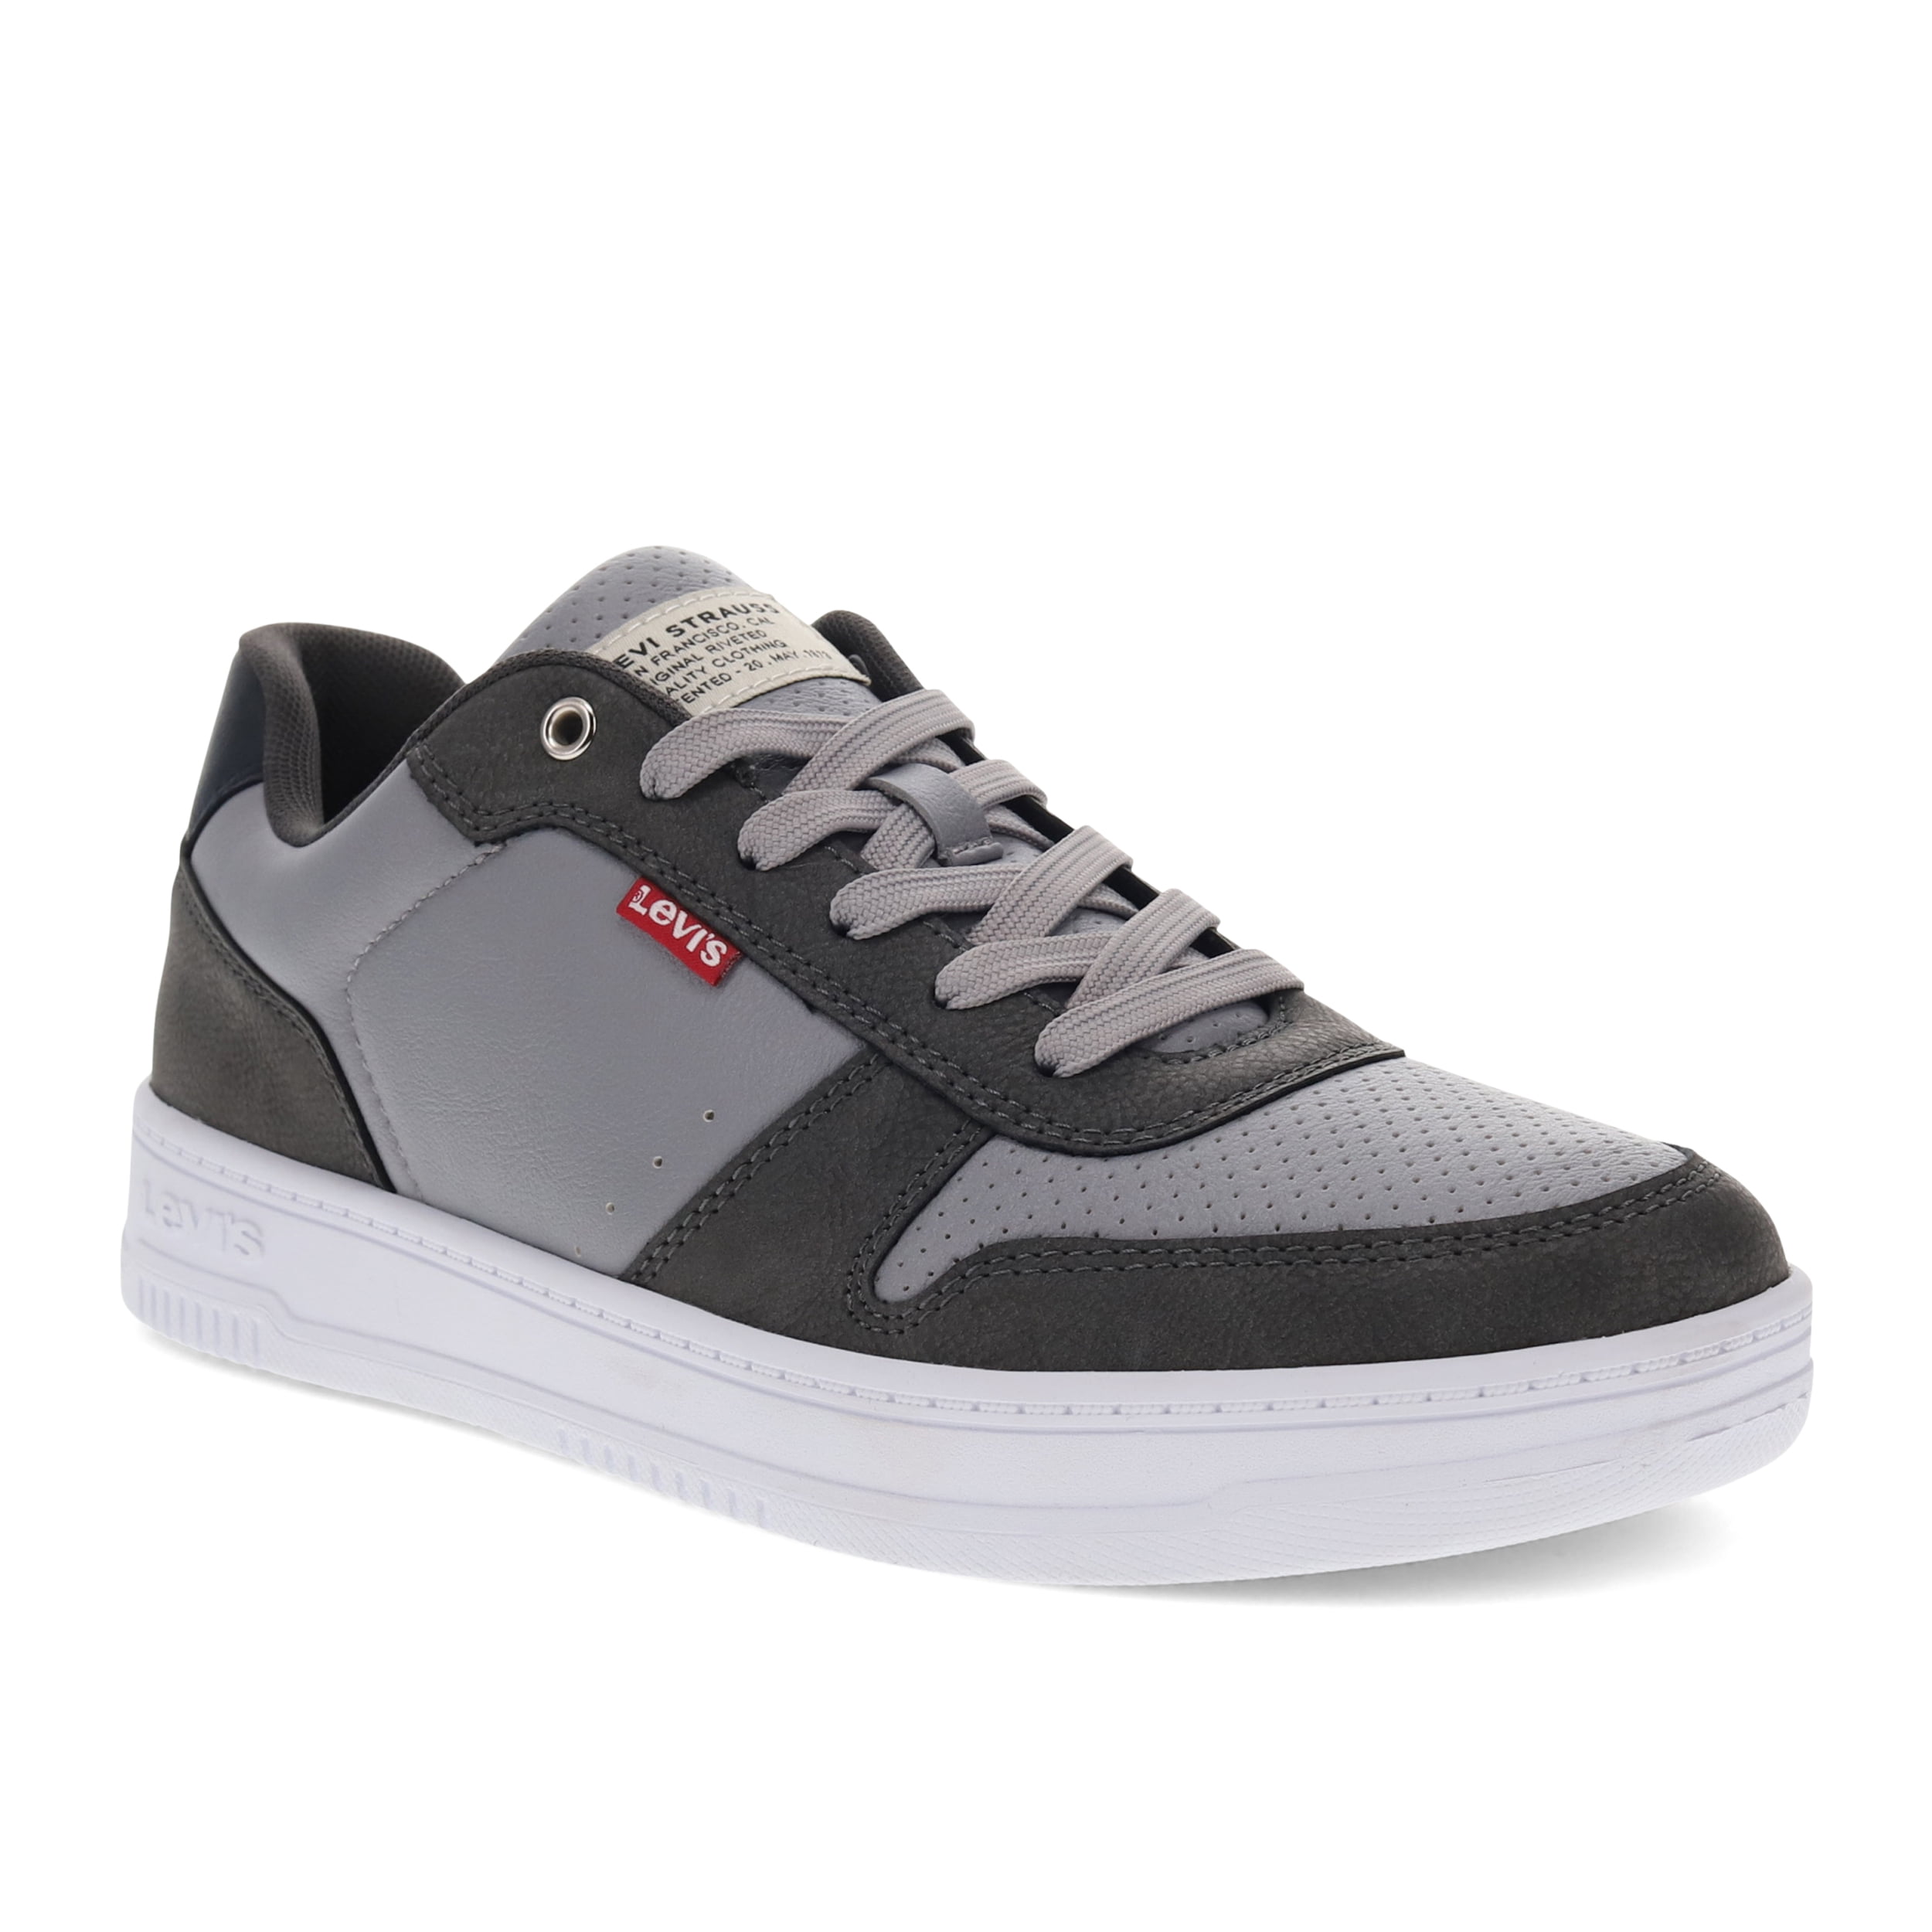 Levi's Mens Drive Lo Vegan Synthetic Leather Casual Lace Up Sneaker ...